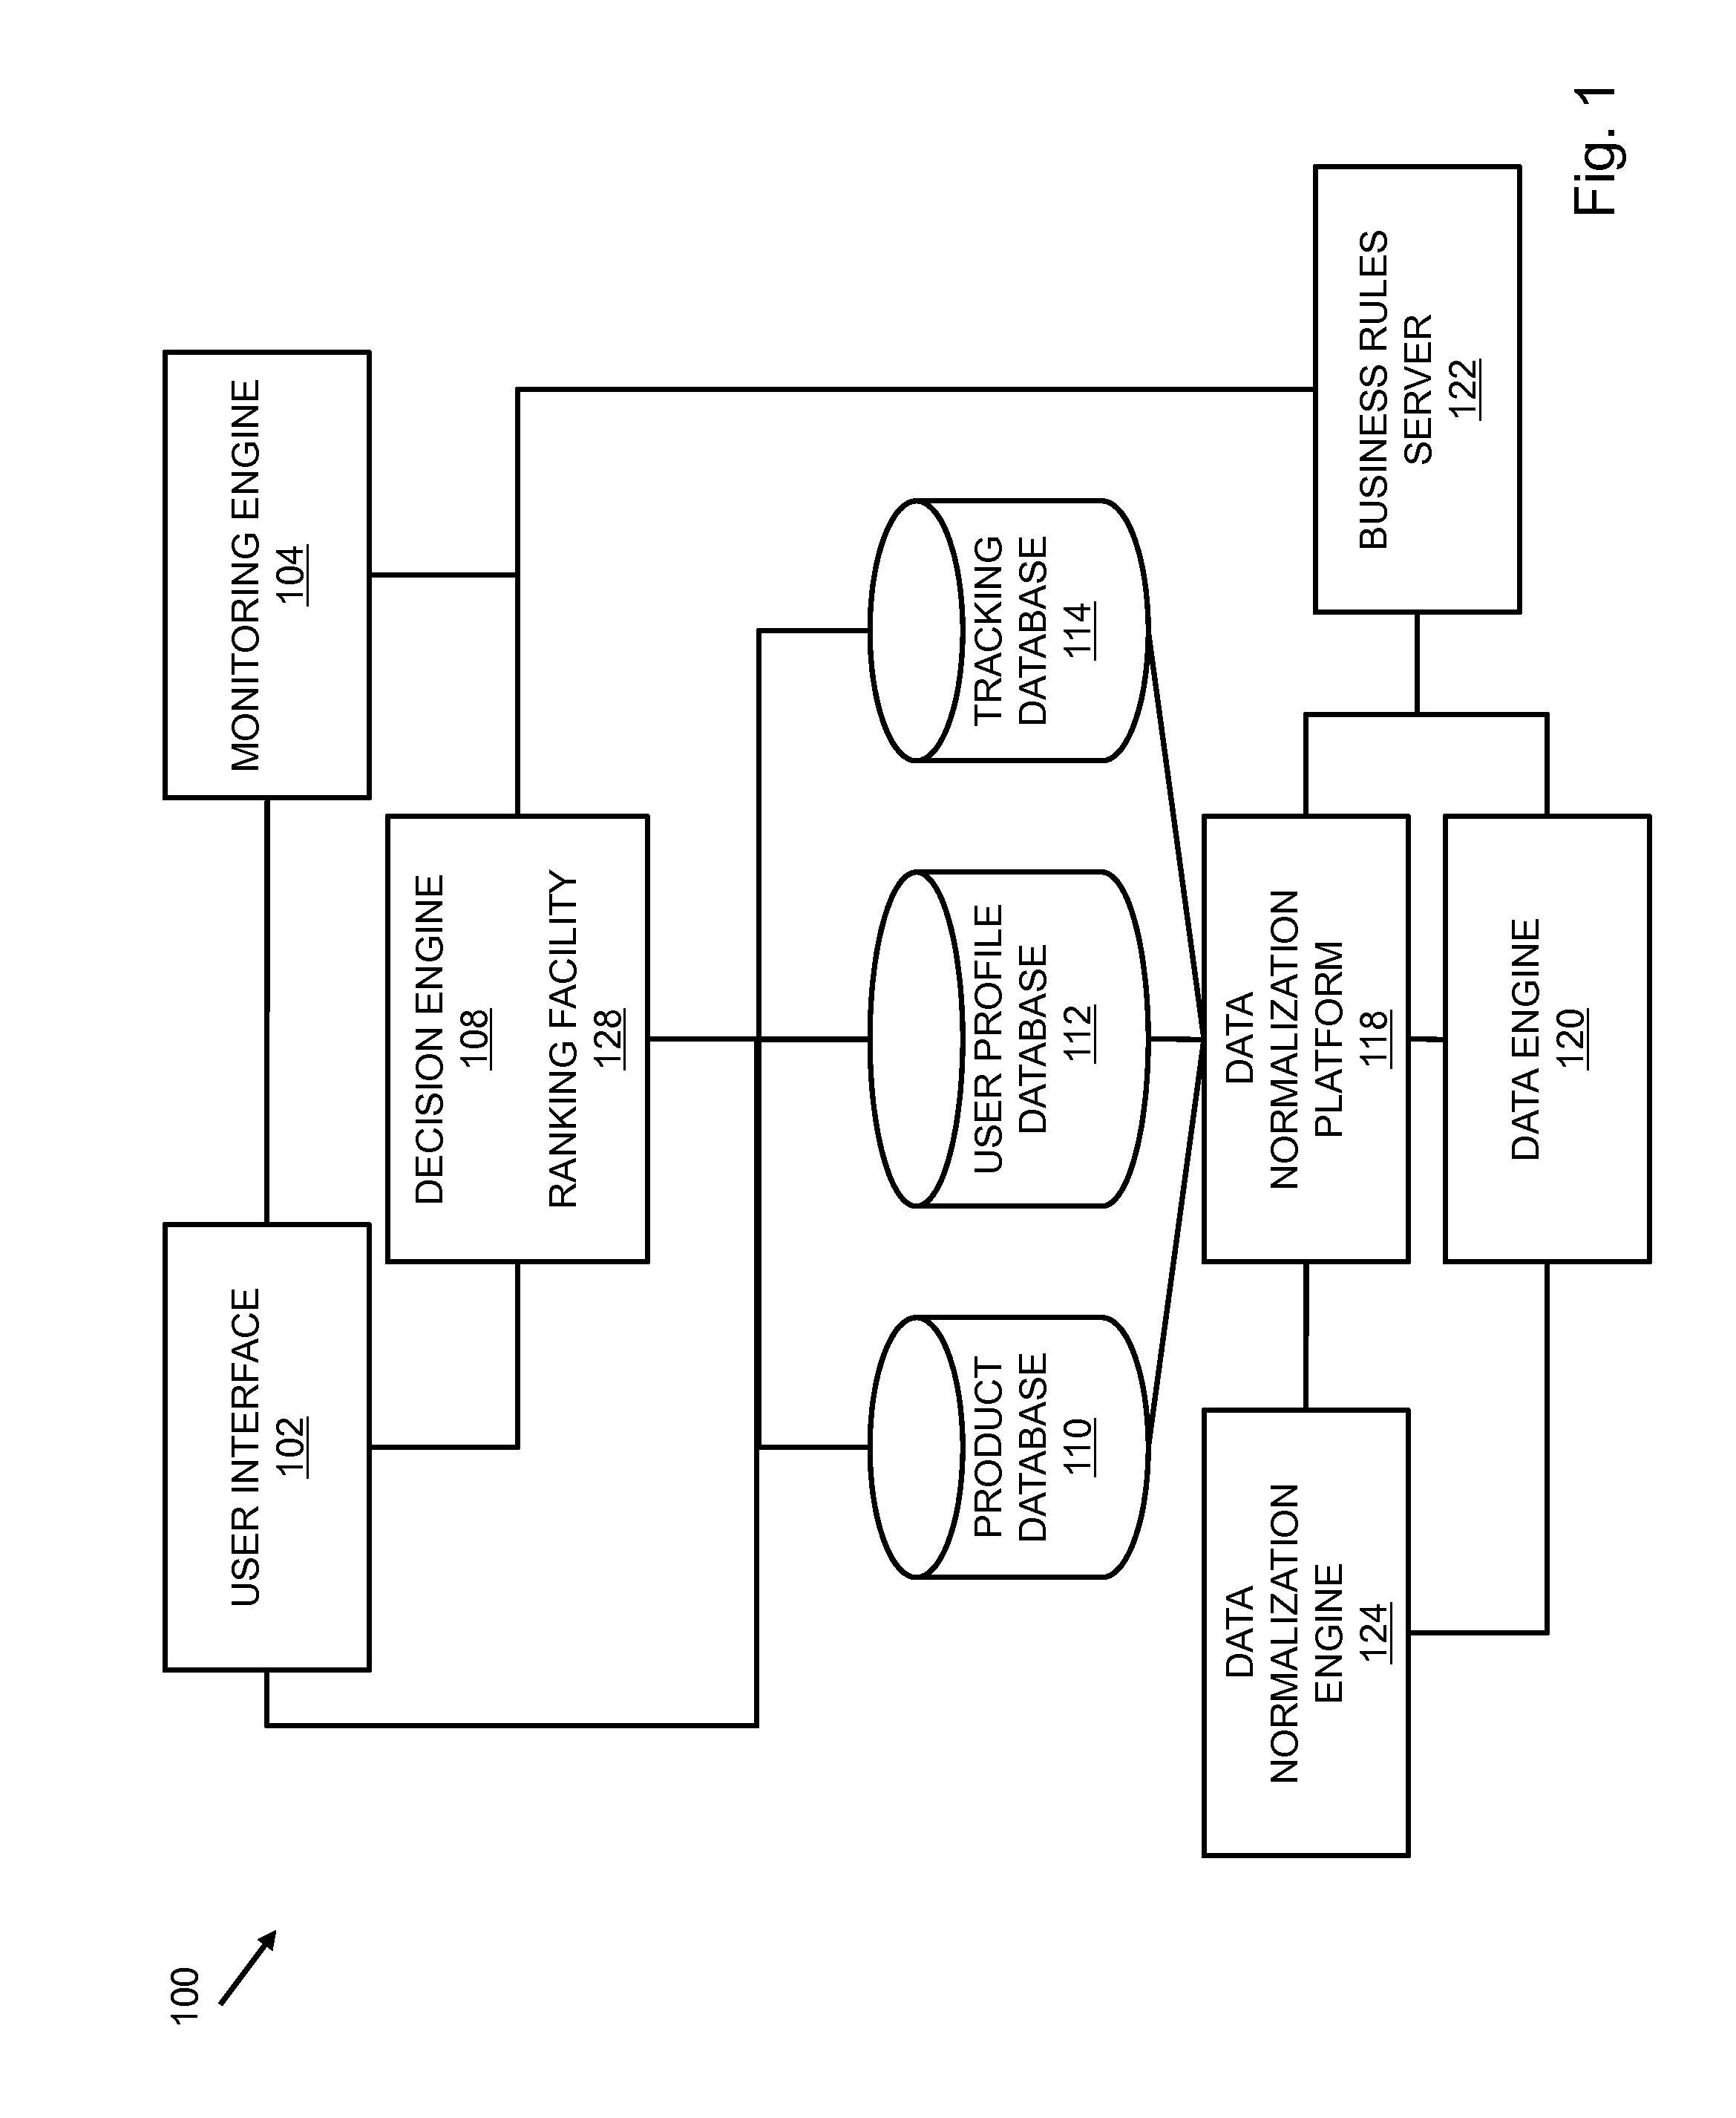 Method and system for identifying a cohort of users based on past shopping behavior and other criteria